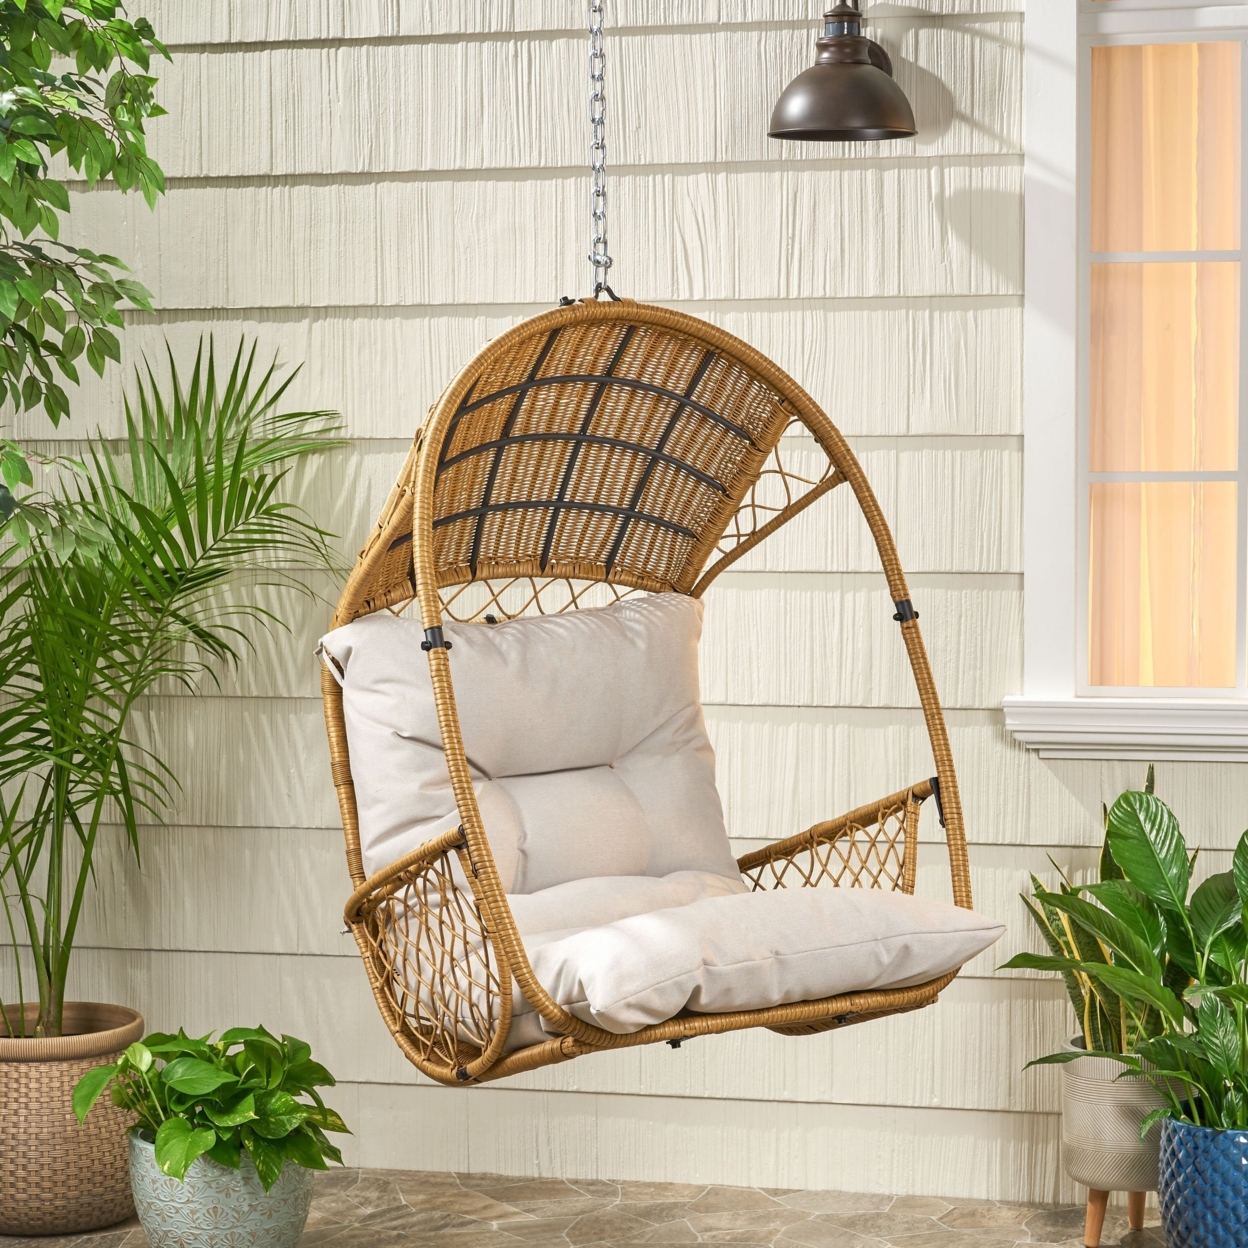 Primo Wicker Hanging Basket Chair (No Stand) - Light Brown/brown/beige